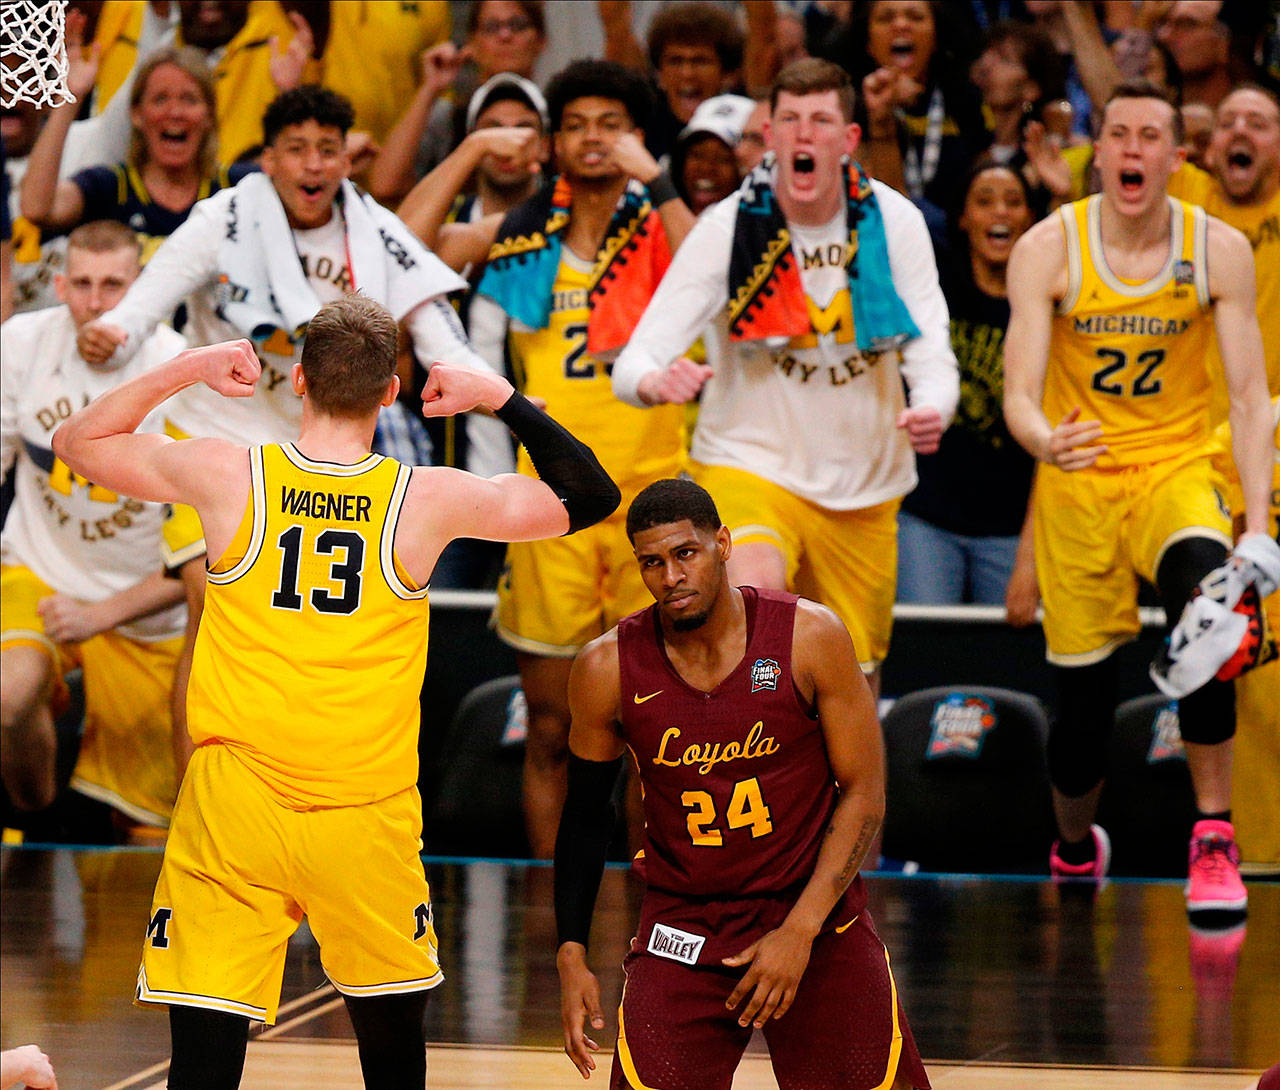 Michigan’s Moritz Wagner (13) celebrates with his teammates as Loyola-Chicago’s Aundre Jackson (24) walks off during the second half of a Final Four game on March 31, 2018, in San Antonio. (AP Photo/Brynn Anderson)